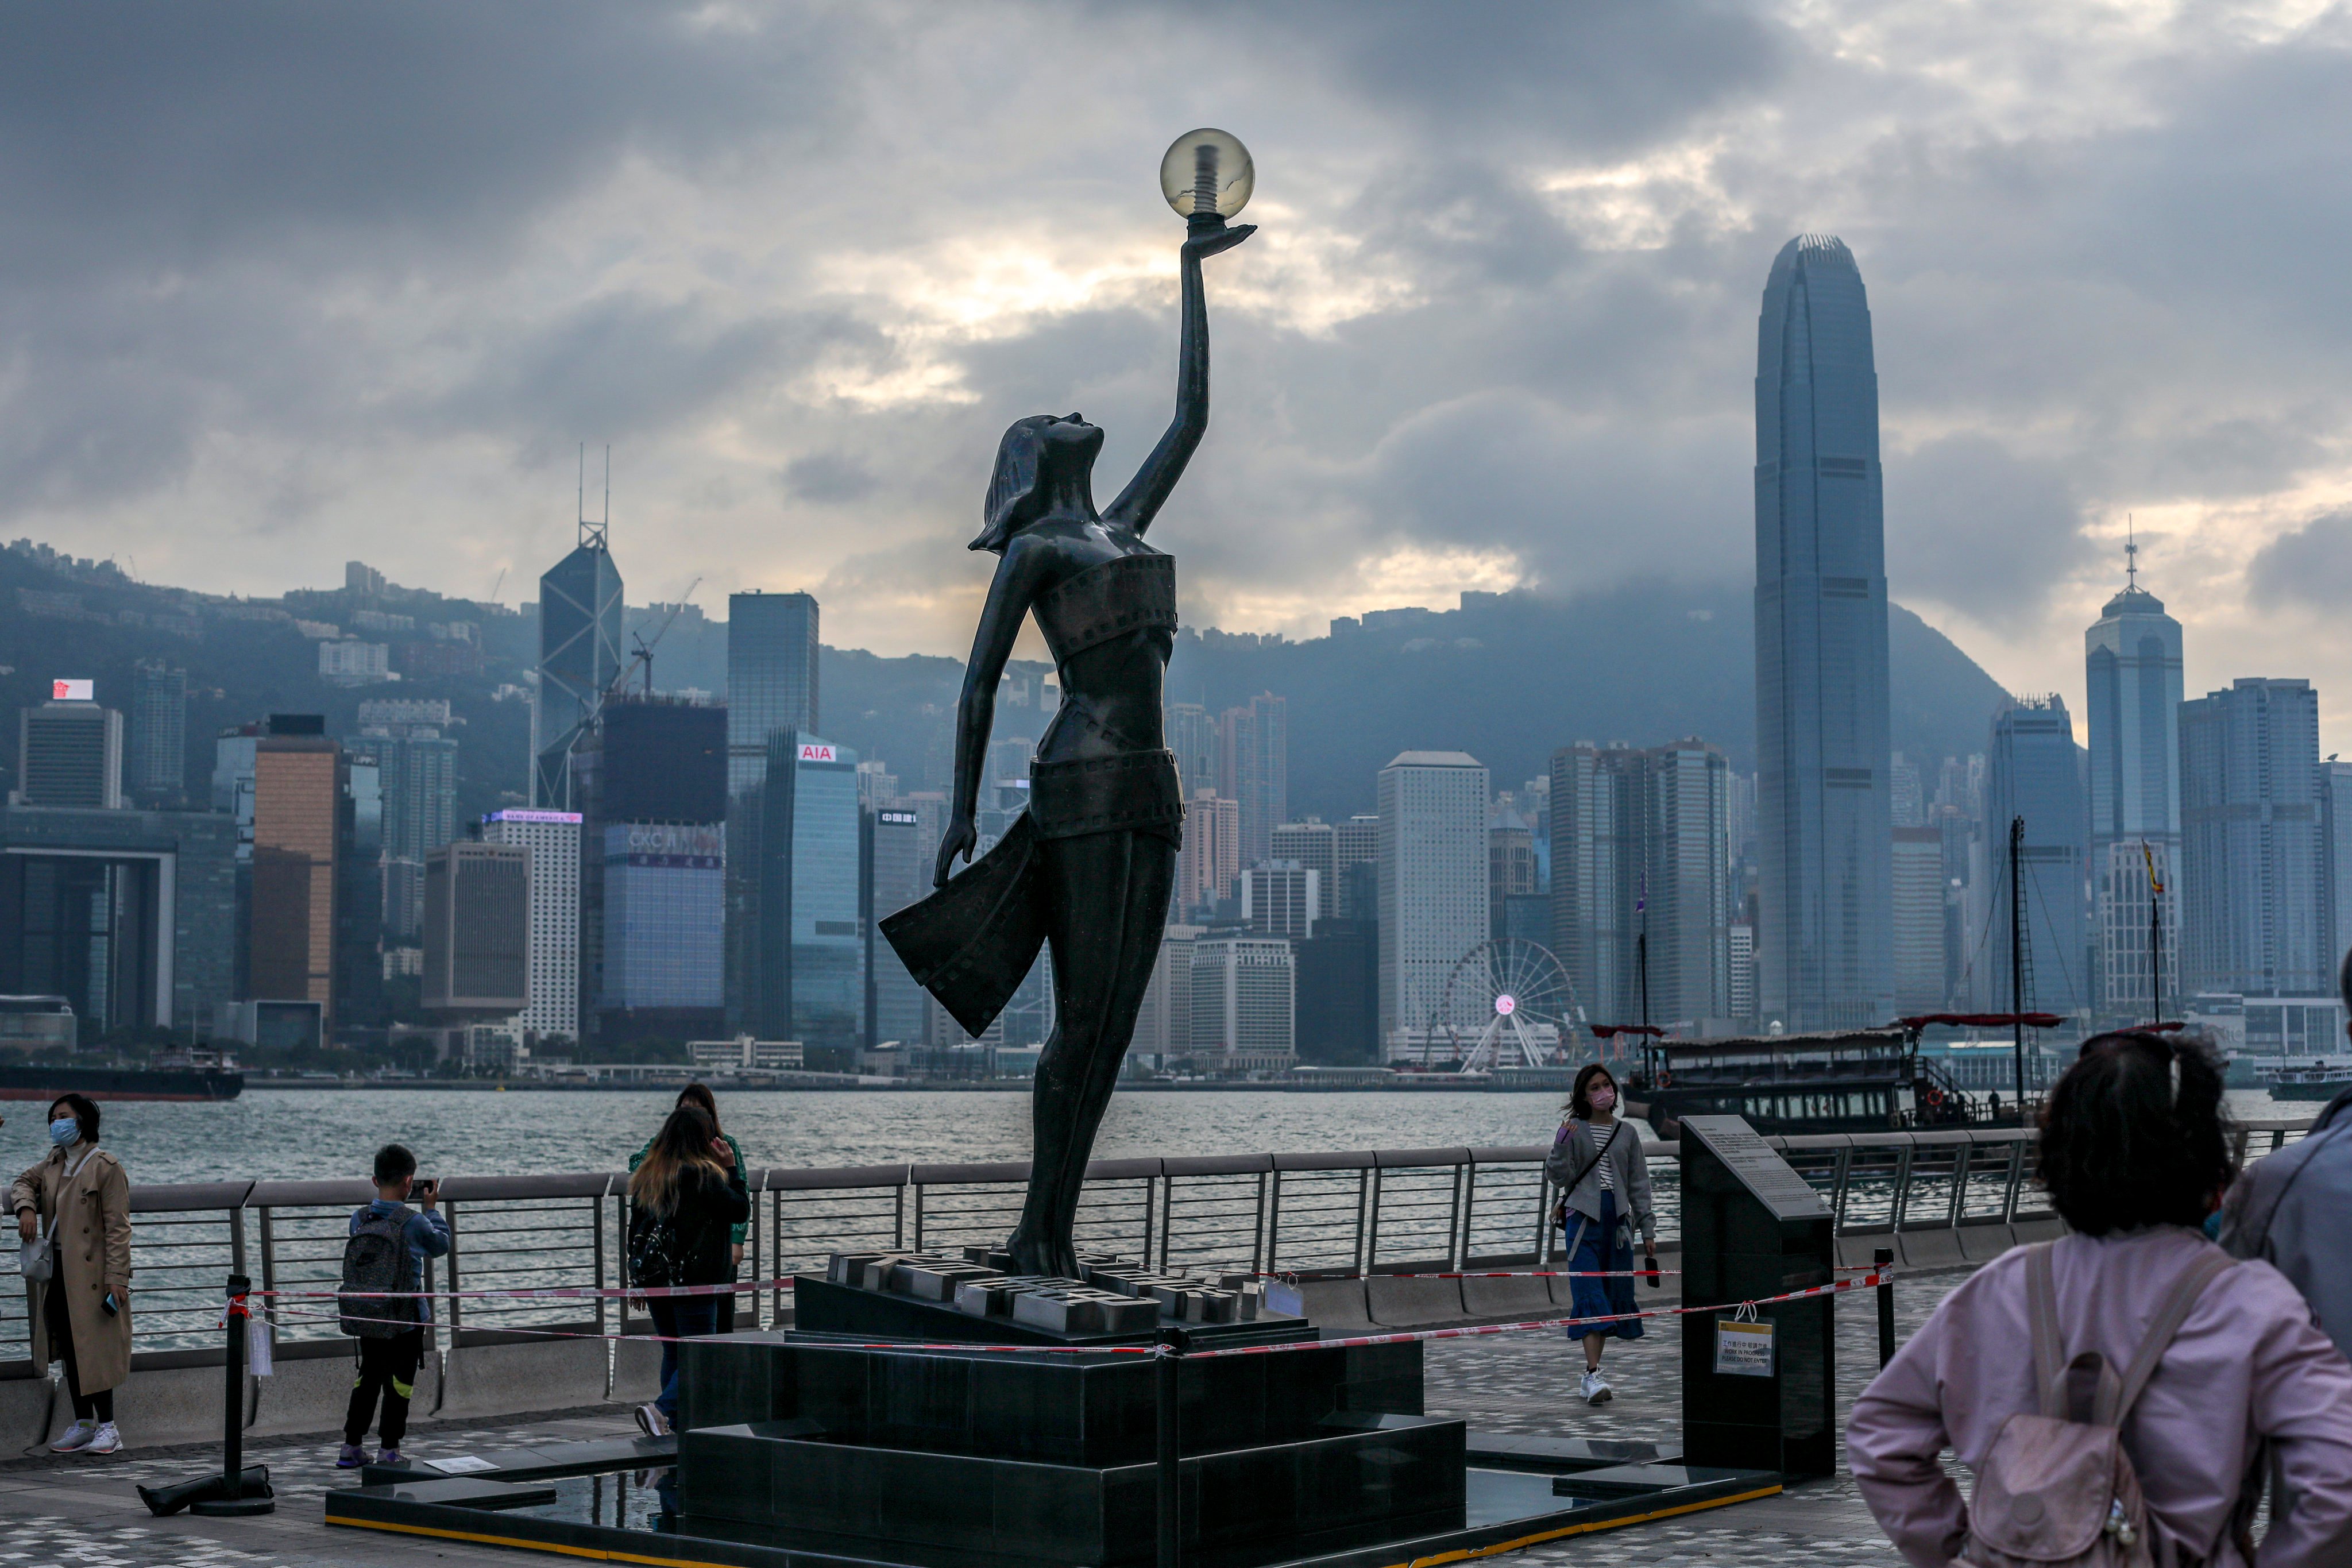 Hong Kong’s iconic skyline is seen from the Avenue of Stars at Tsim Sha Tsui. Pro-Beijing figures have hailed what they say is the city’s path out of the shadows of political turmoil. Photo: Xiaomei Chen